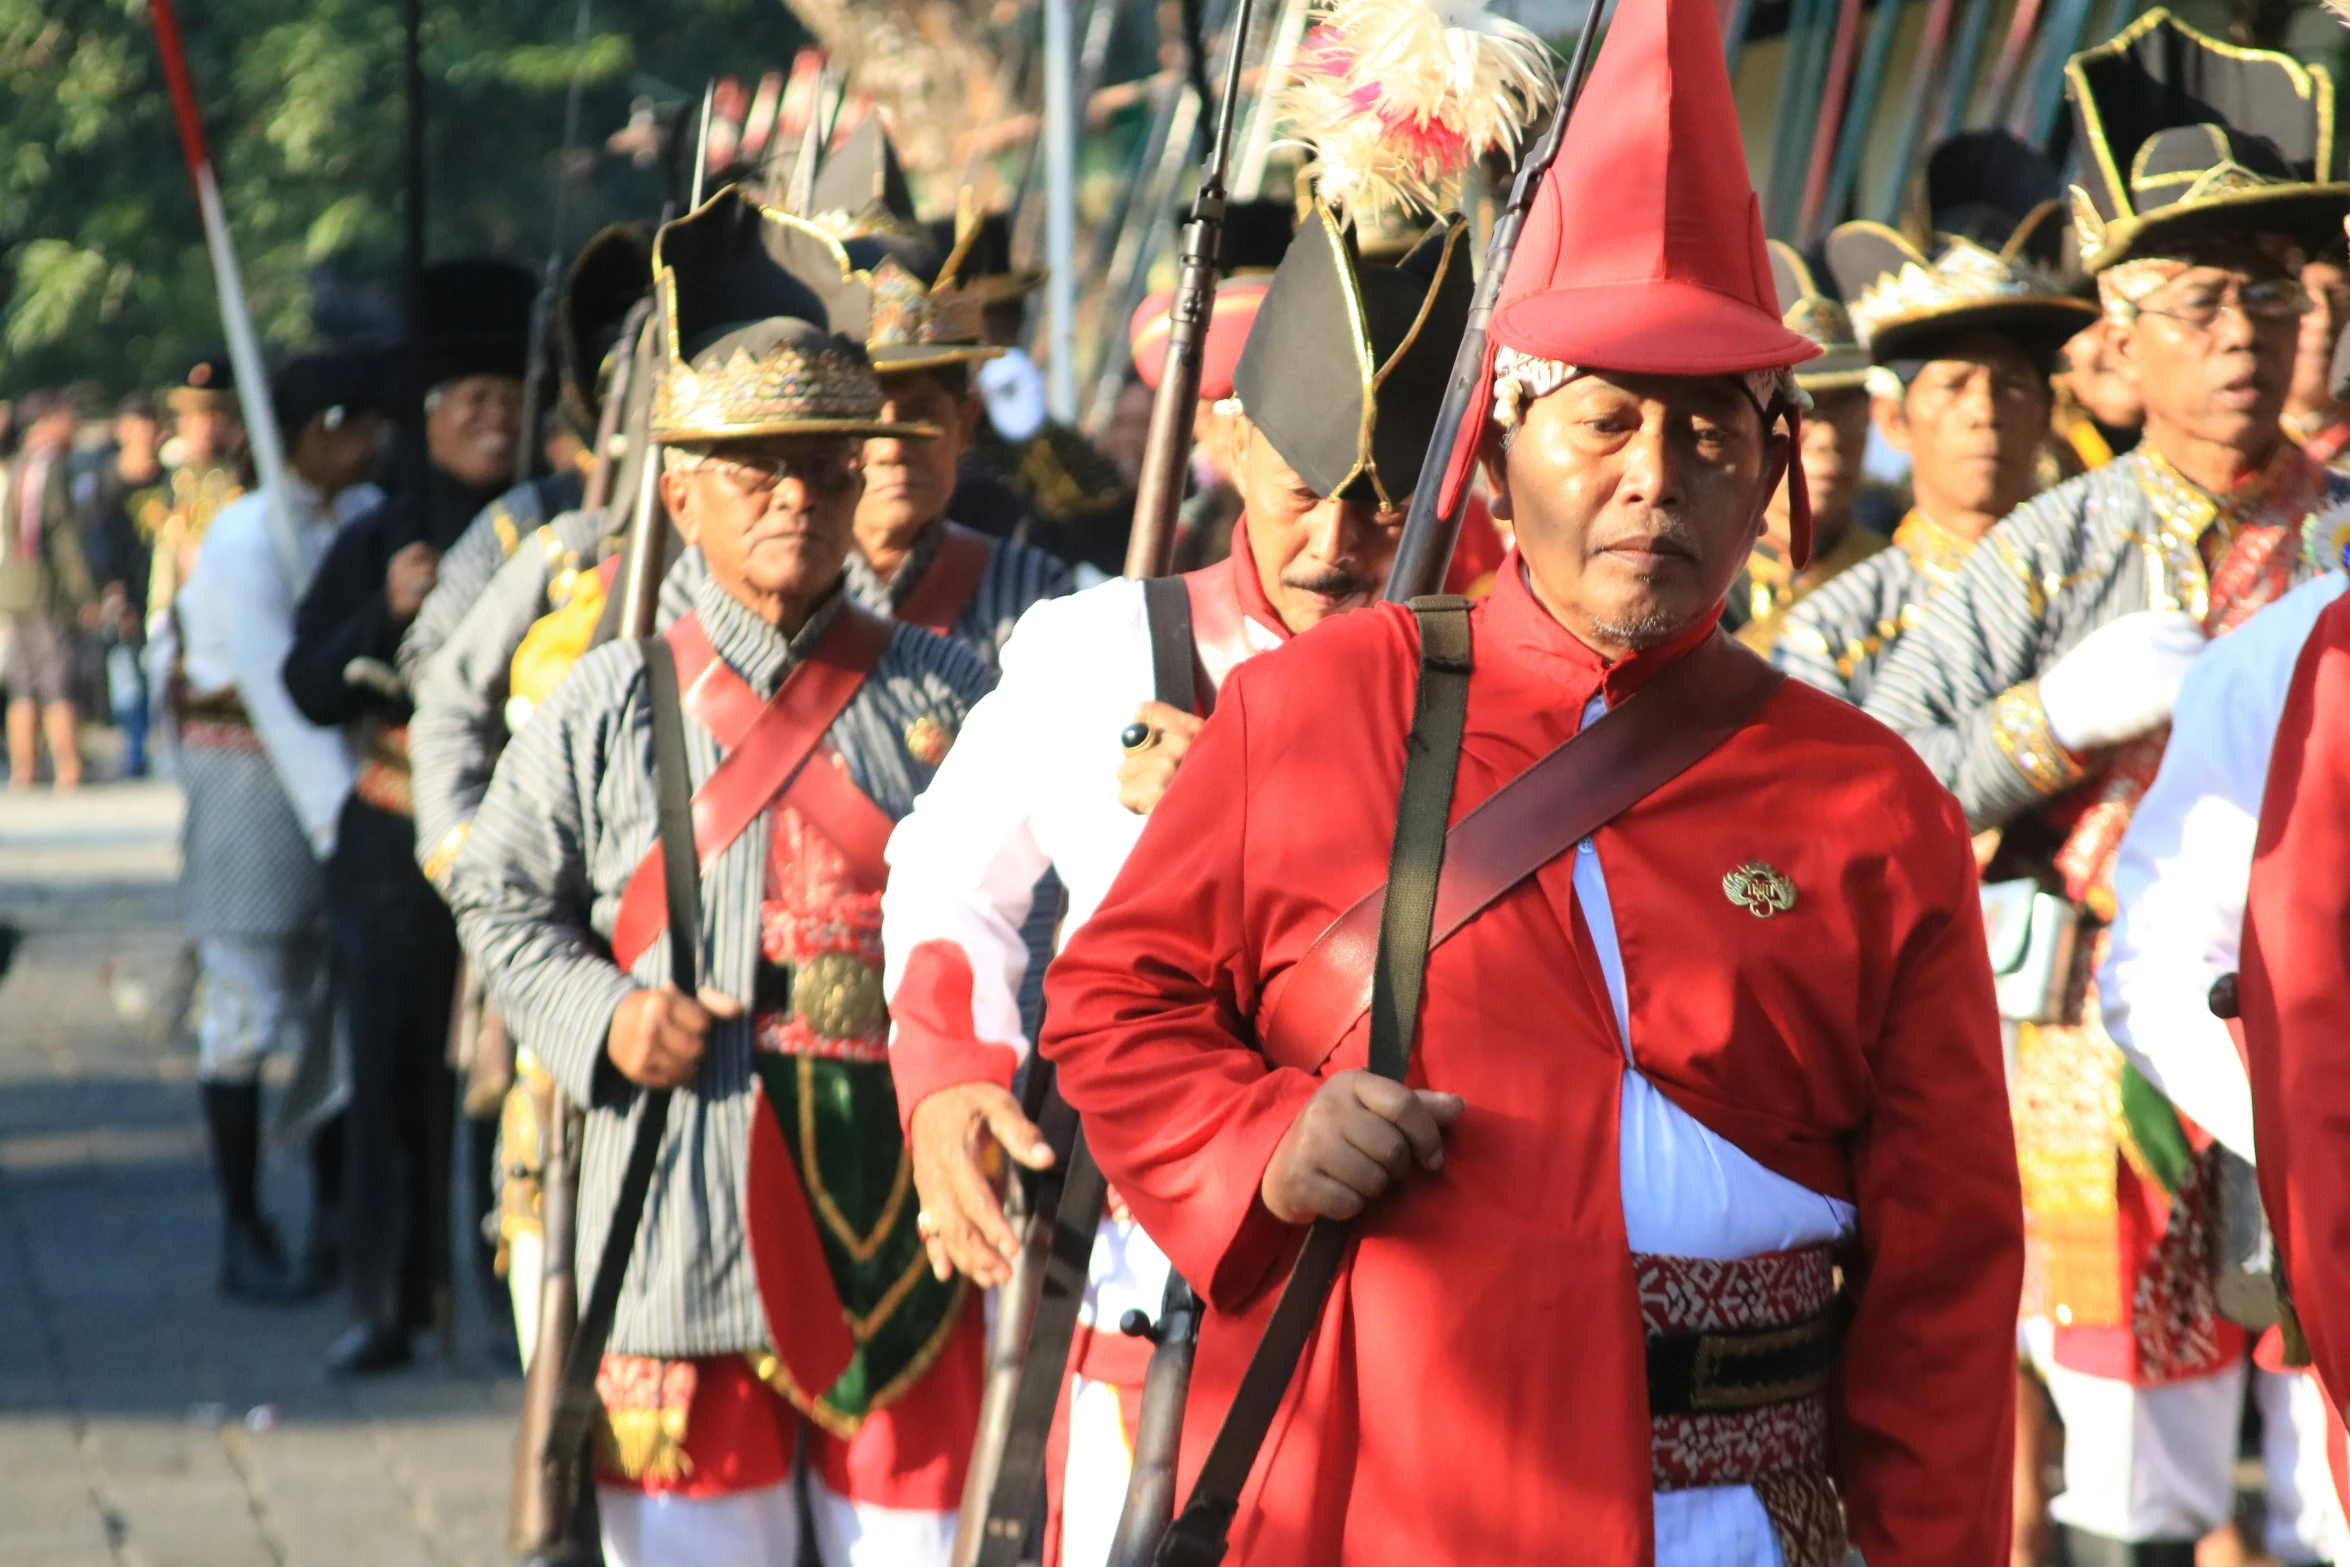 a parade of men in costume with red hats and uniforms